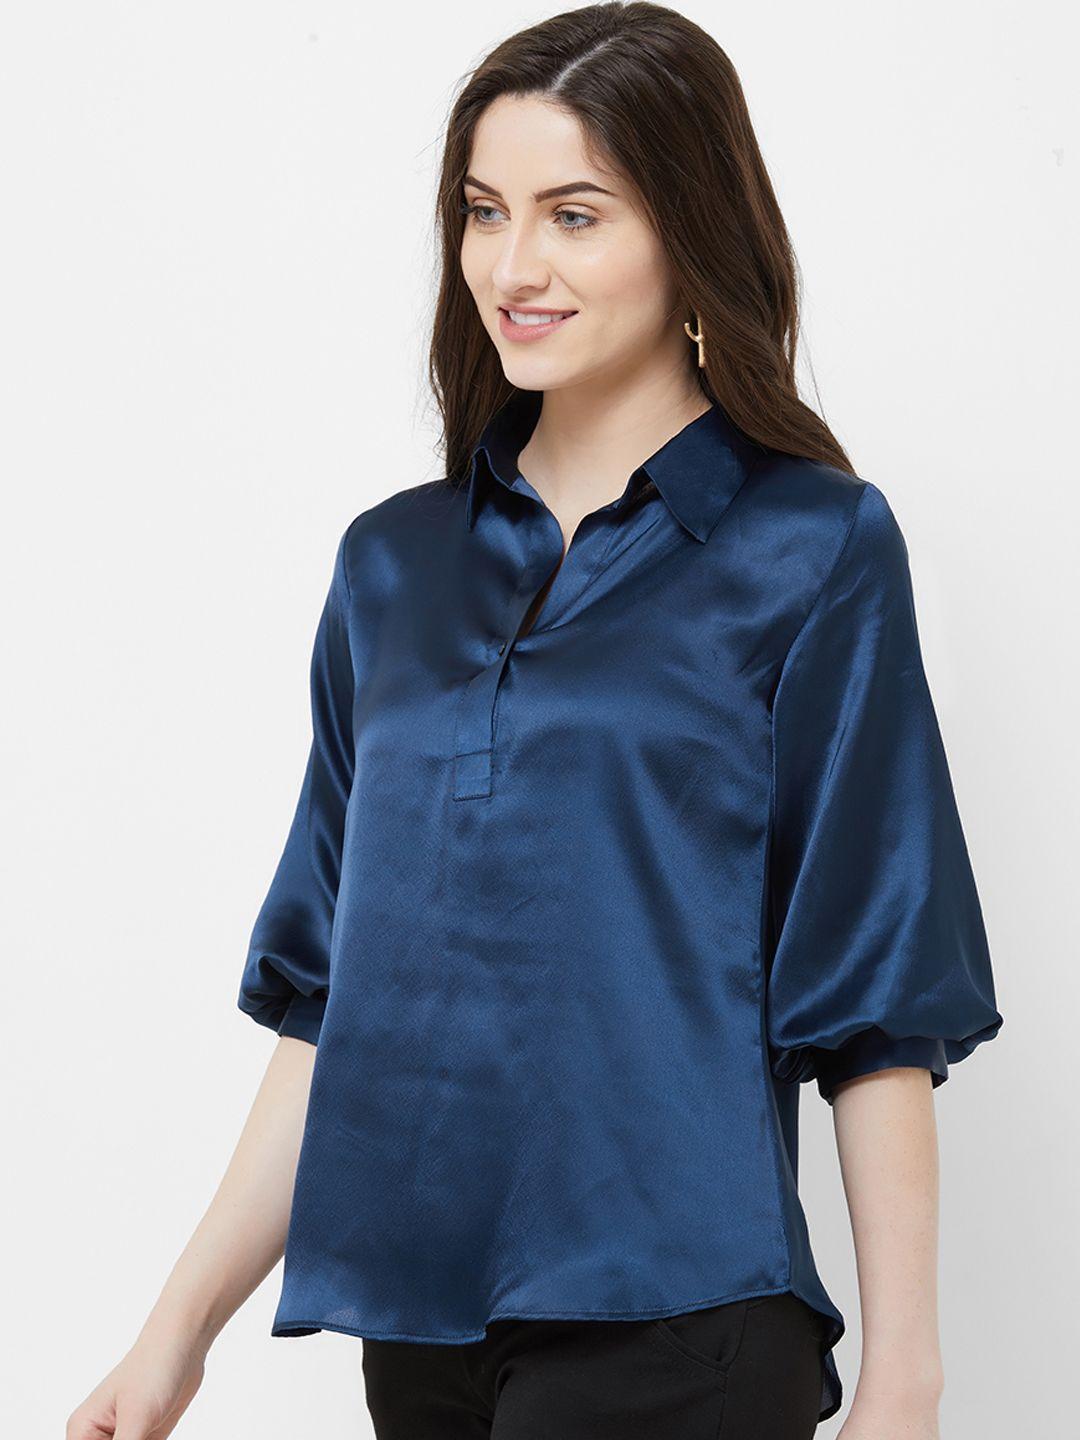 mish women navy blue solid shirt style top